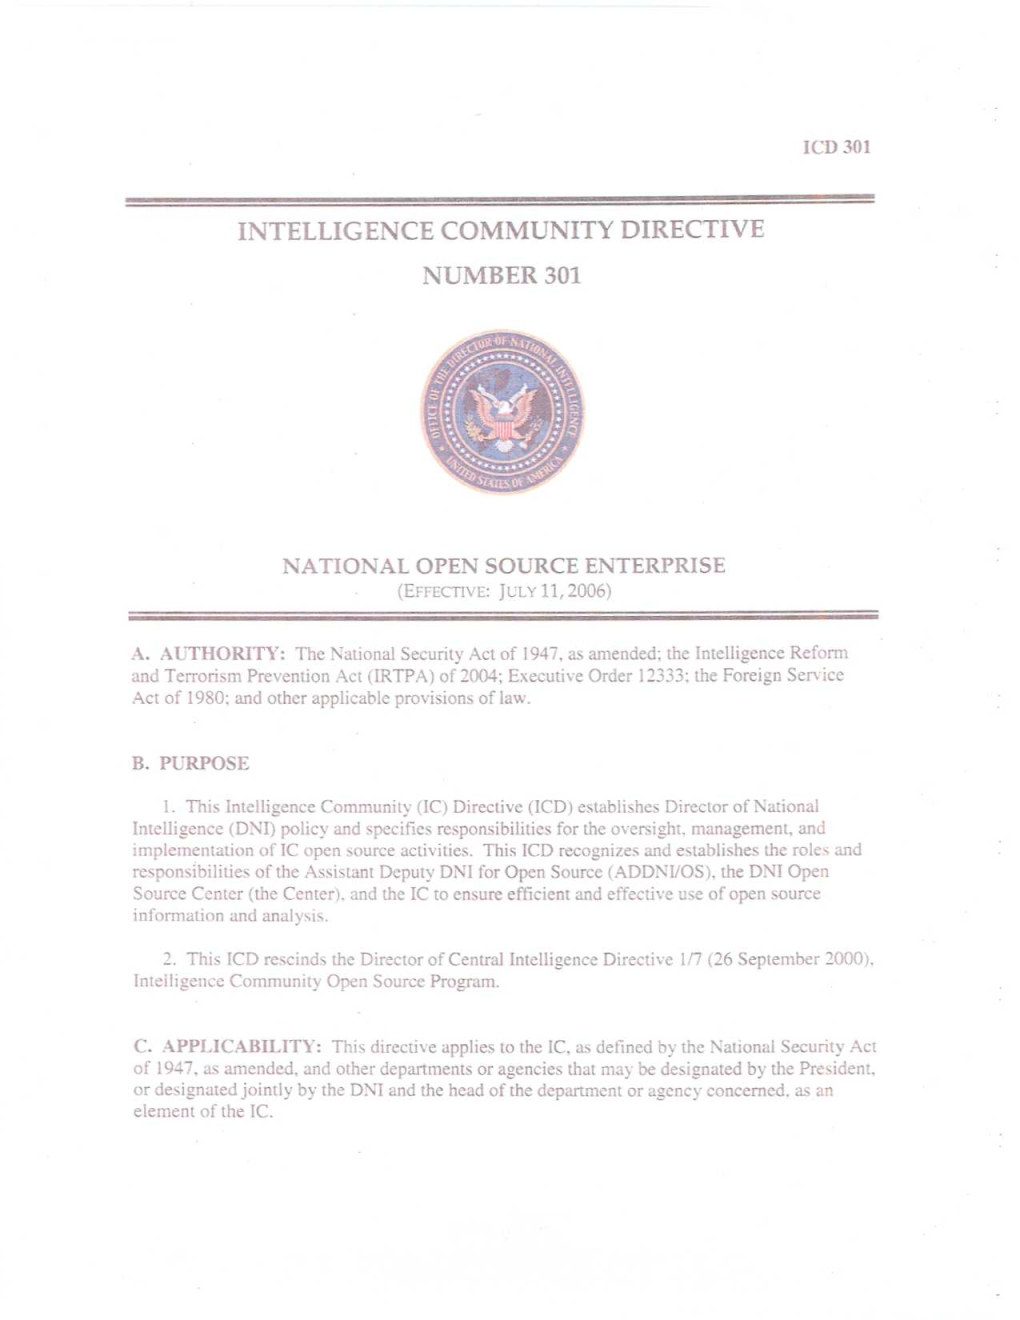 Intelligence Community Directive Number 301 (ICD 301)